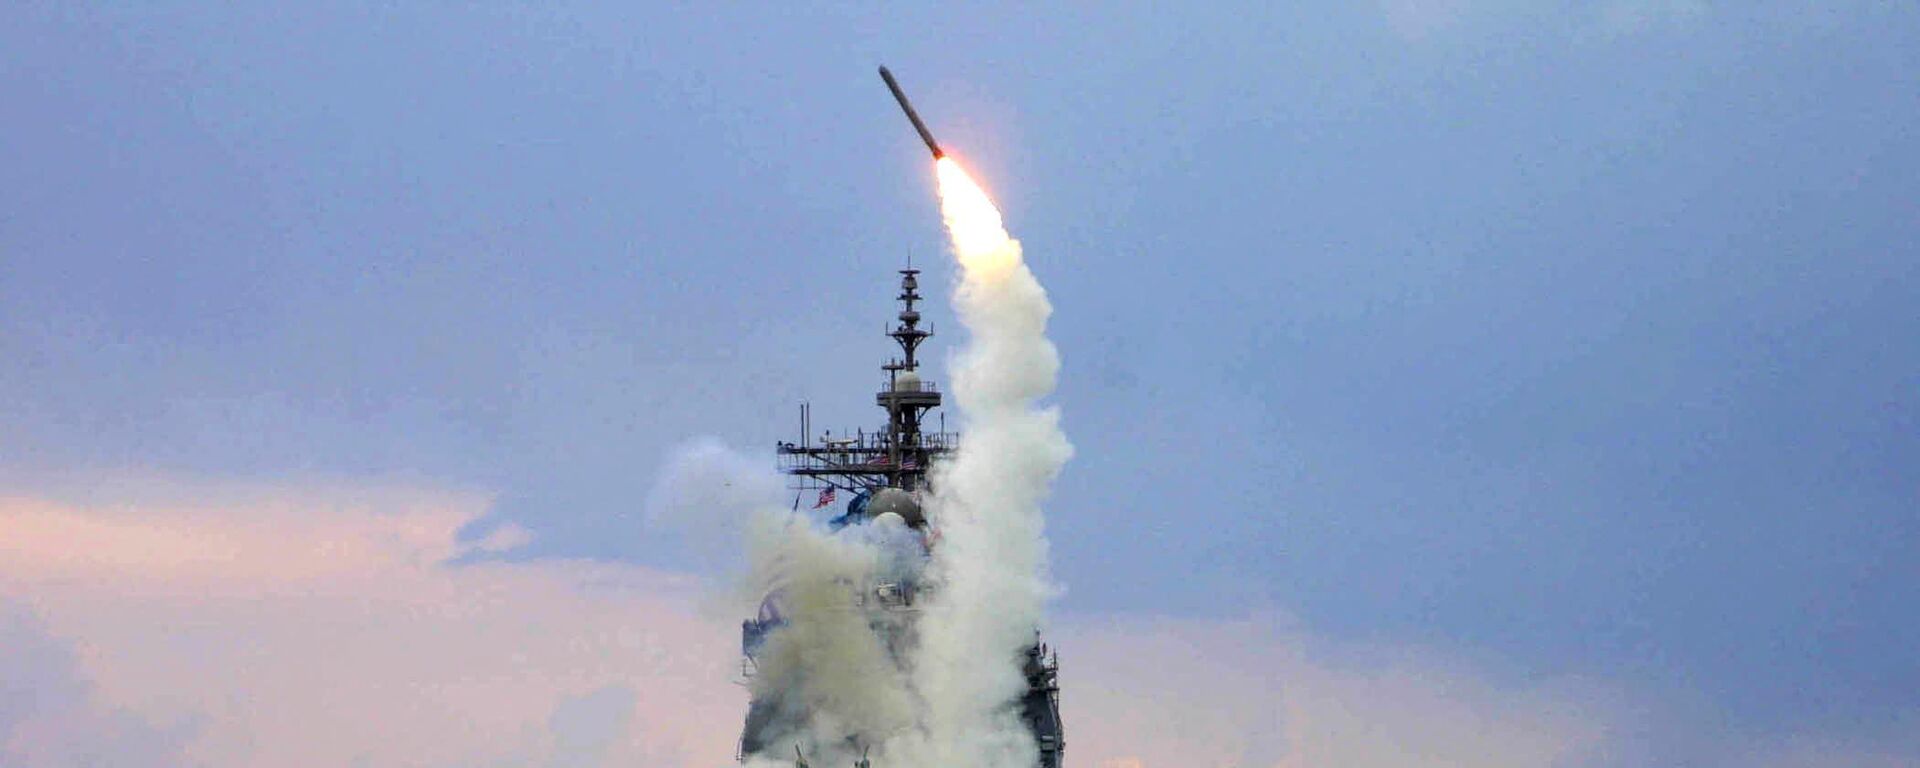 This US Navy handout photo released 23 March 2003 shows a US Navy Tomahawk Land Attack Missile (TLAM) being launched from the guided missile cruiser USS Cape St. George, 23 March 2003, in the Mediterranean Sea. - Sputnik International, 1920, 05.12.2023